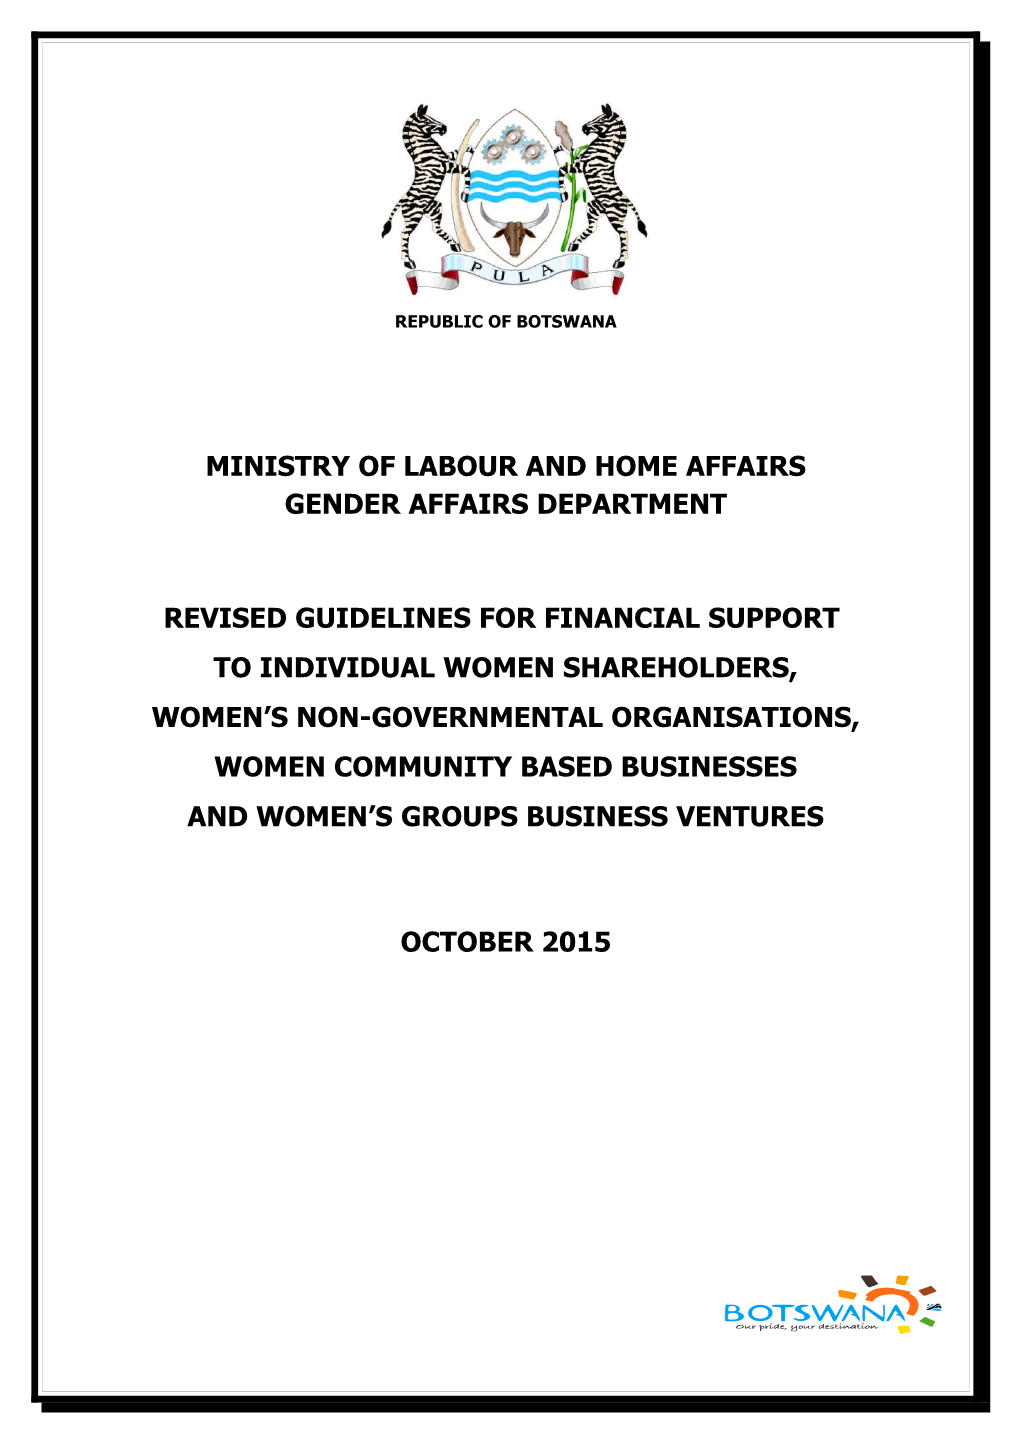 Ministry of Labour and Home Affairs